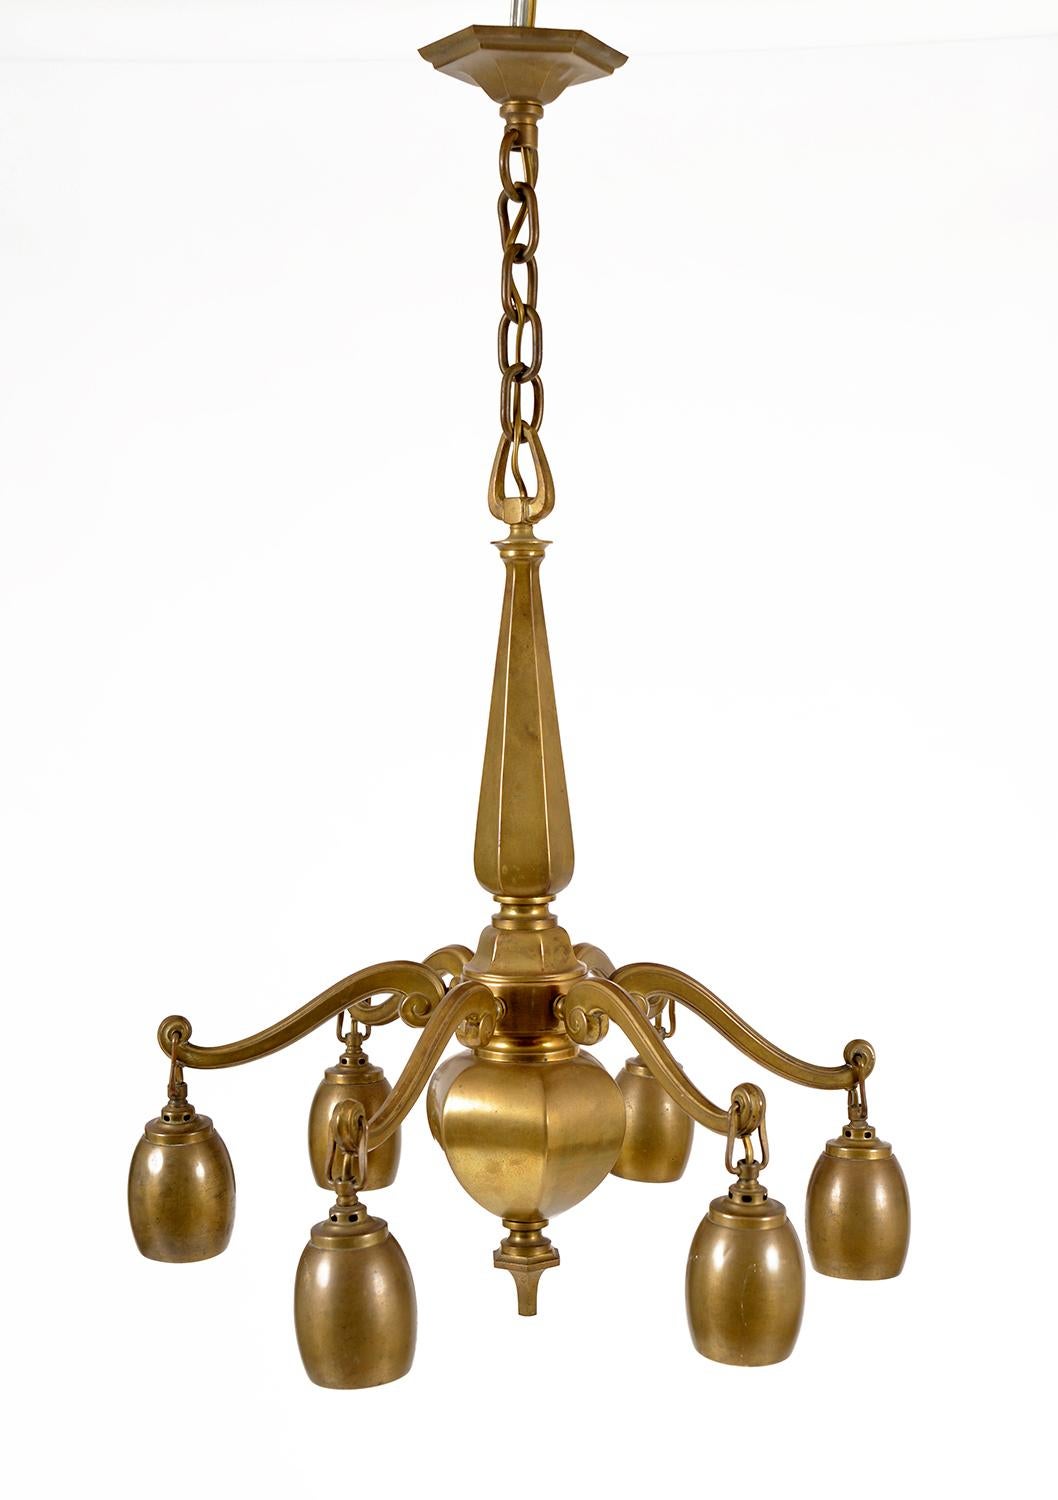 This beautifully patinated solid brass Bohemian ceiling light is unmarked but has a real Teutonic feel, and is likely to have been made in Austria, Germany or the Czech Republic during the early years of the 20th century.
The sculptural brass body